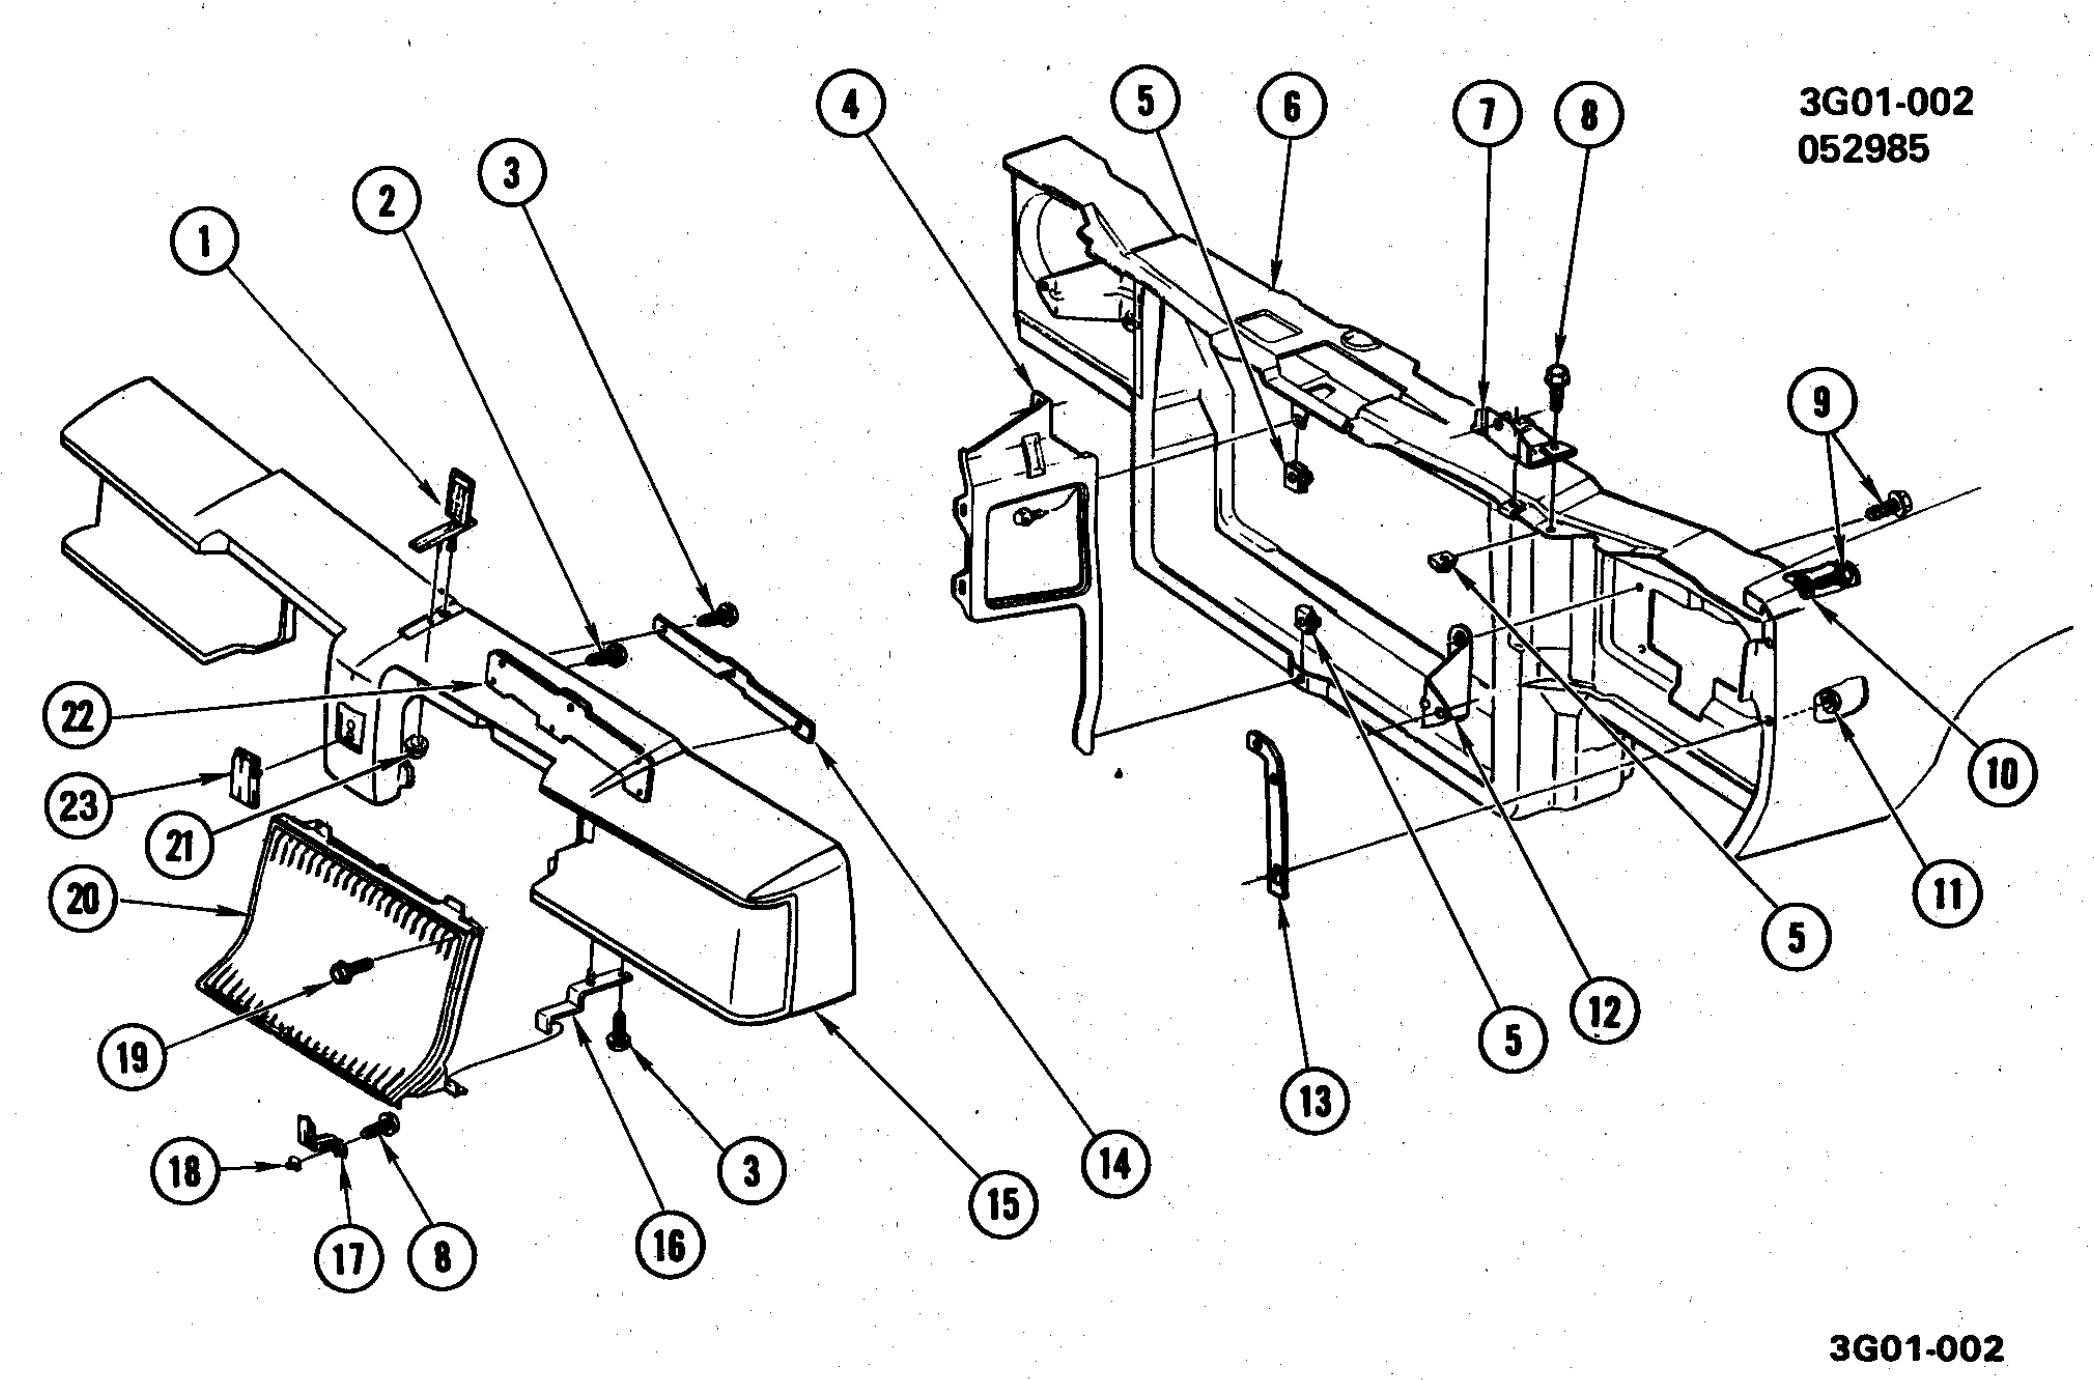 G-body Olds 81-86 Grille Mounting Diagram.JPG